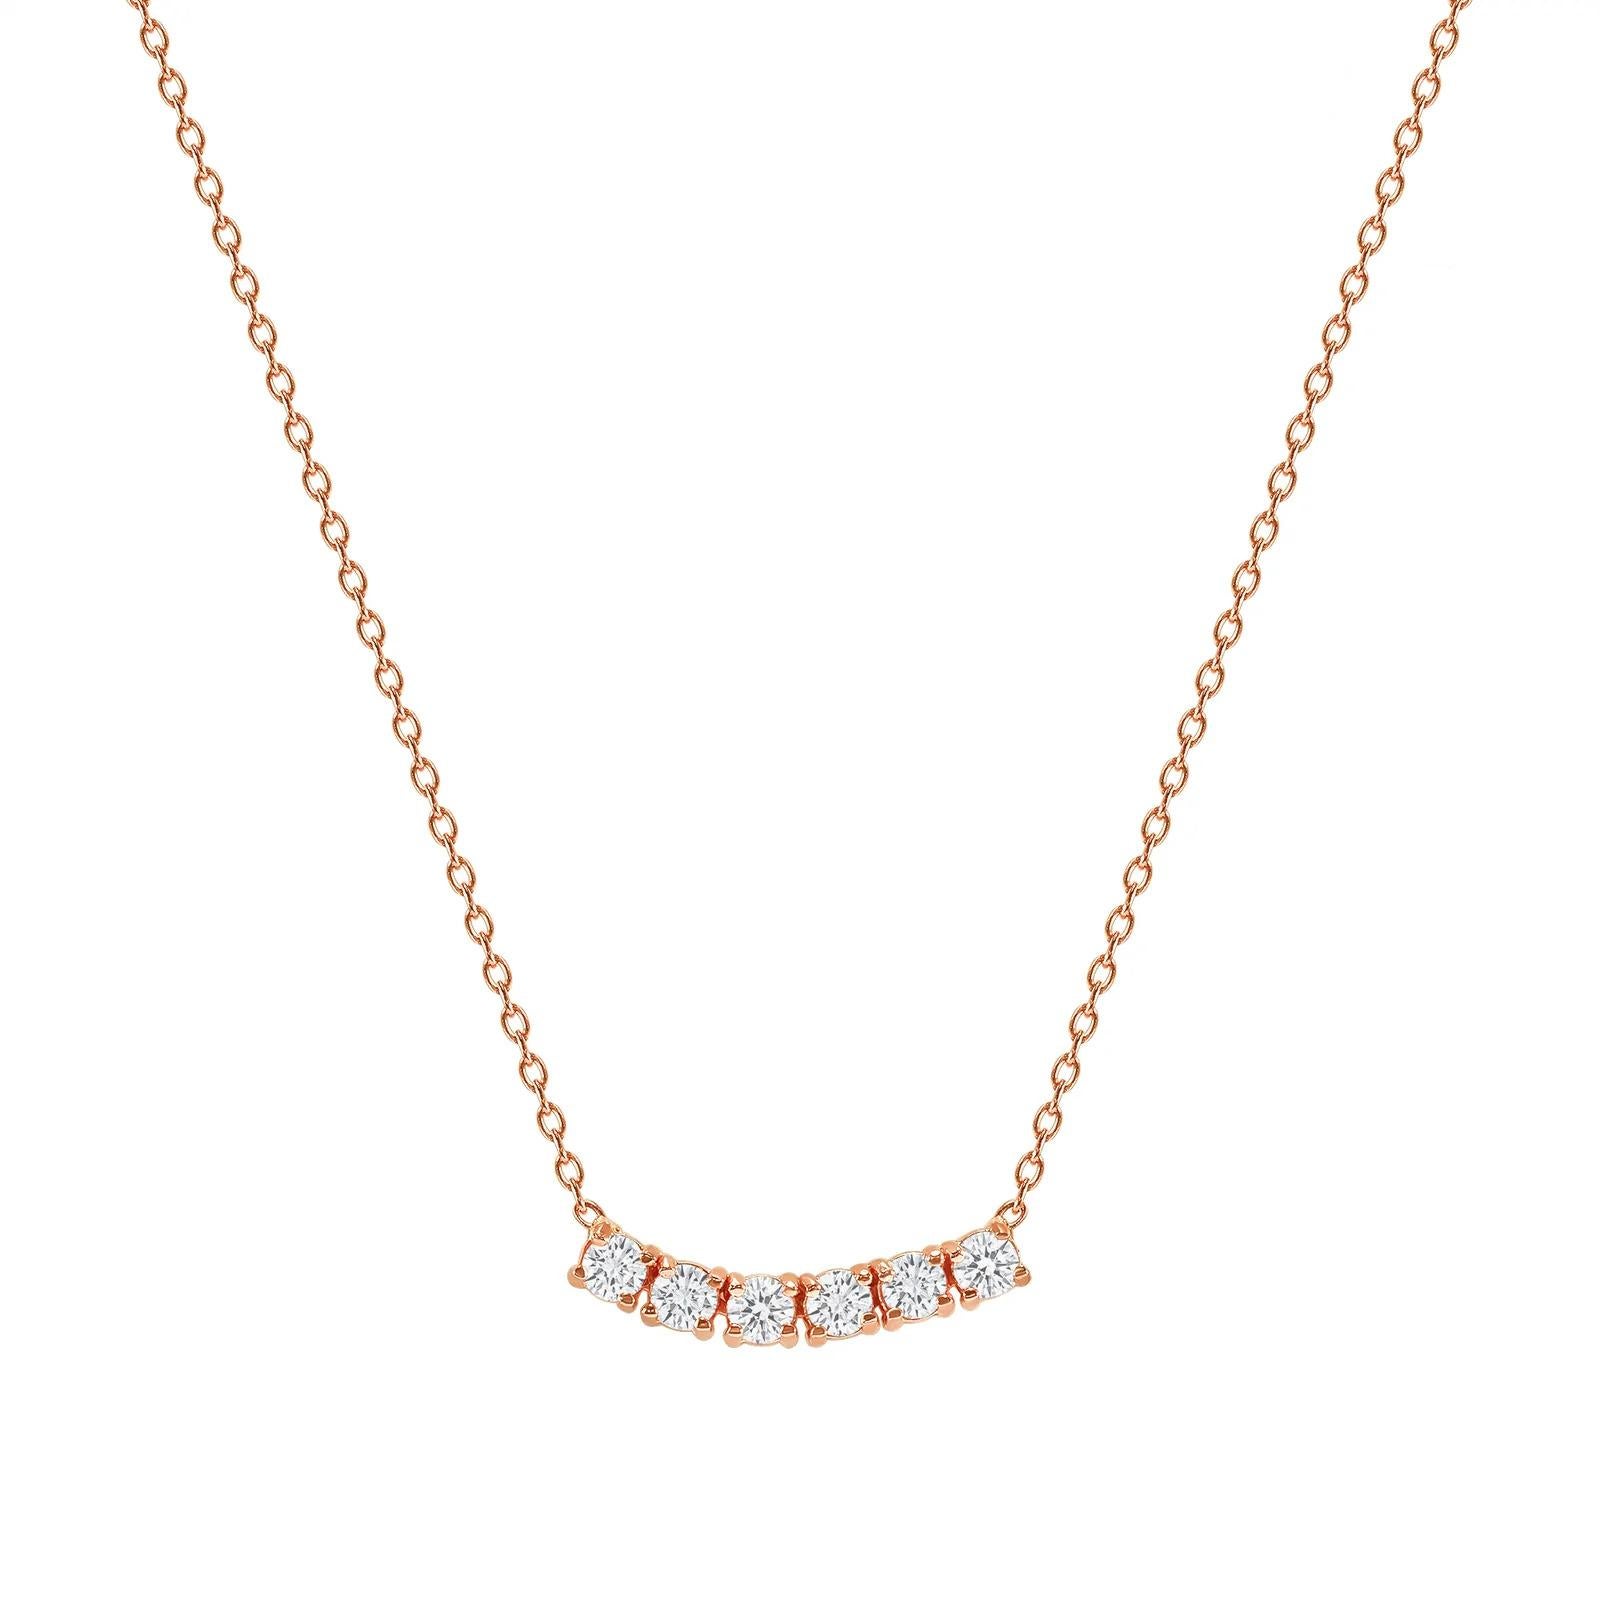 This petite, curved diamond necklace is crafted with gorgeous 14k gold set with six round diamonds.  

Gold: 14k 
Diamond Total Carats: 1 ct
Diamond Cut: Round (6 diamonds)
Diamond Clarity: VS
Diamond Color: F
Color: Rose Gold
Necklace Length: 18